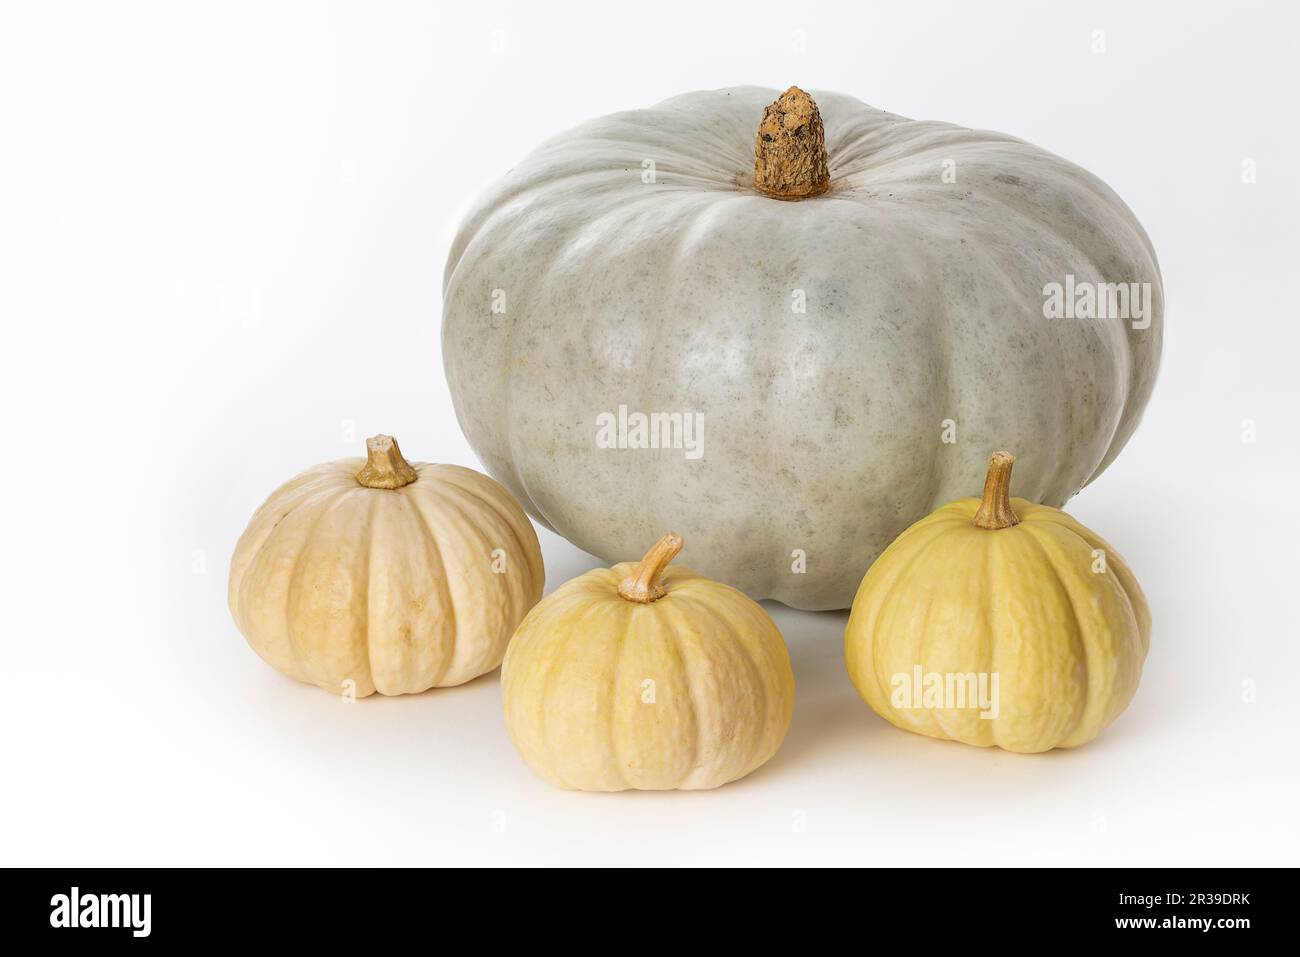 Ornamental pumpkins and Crown Prince pumpkin on white background Stock Photo